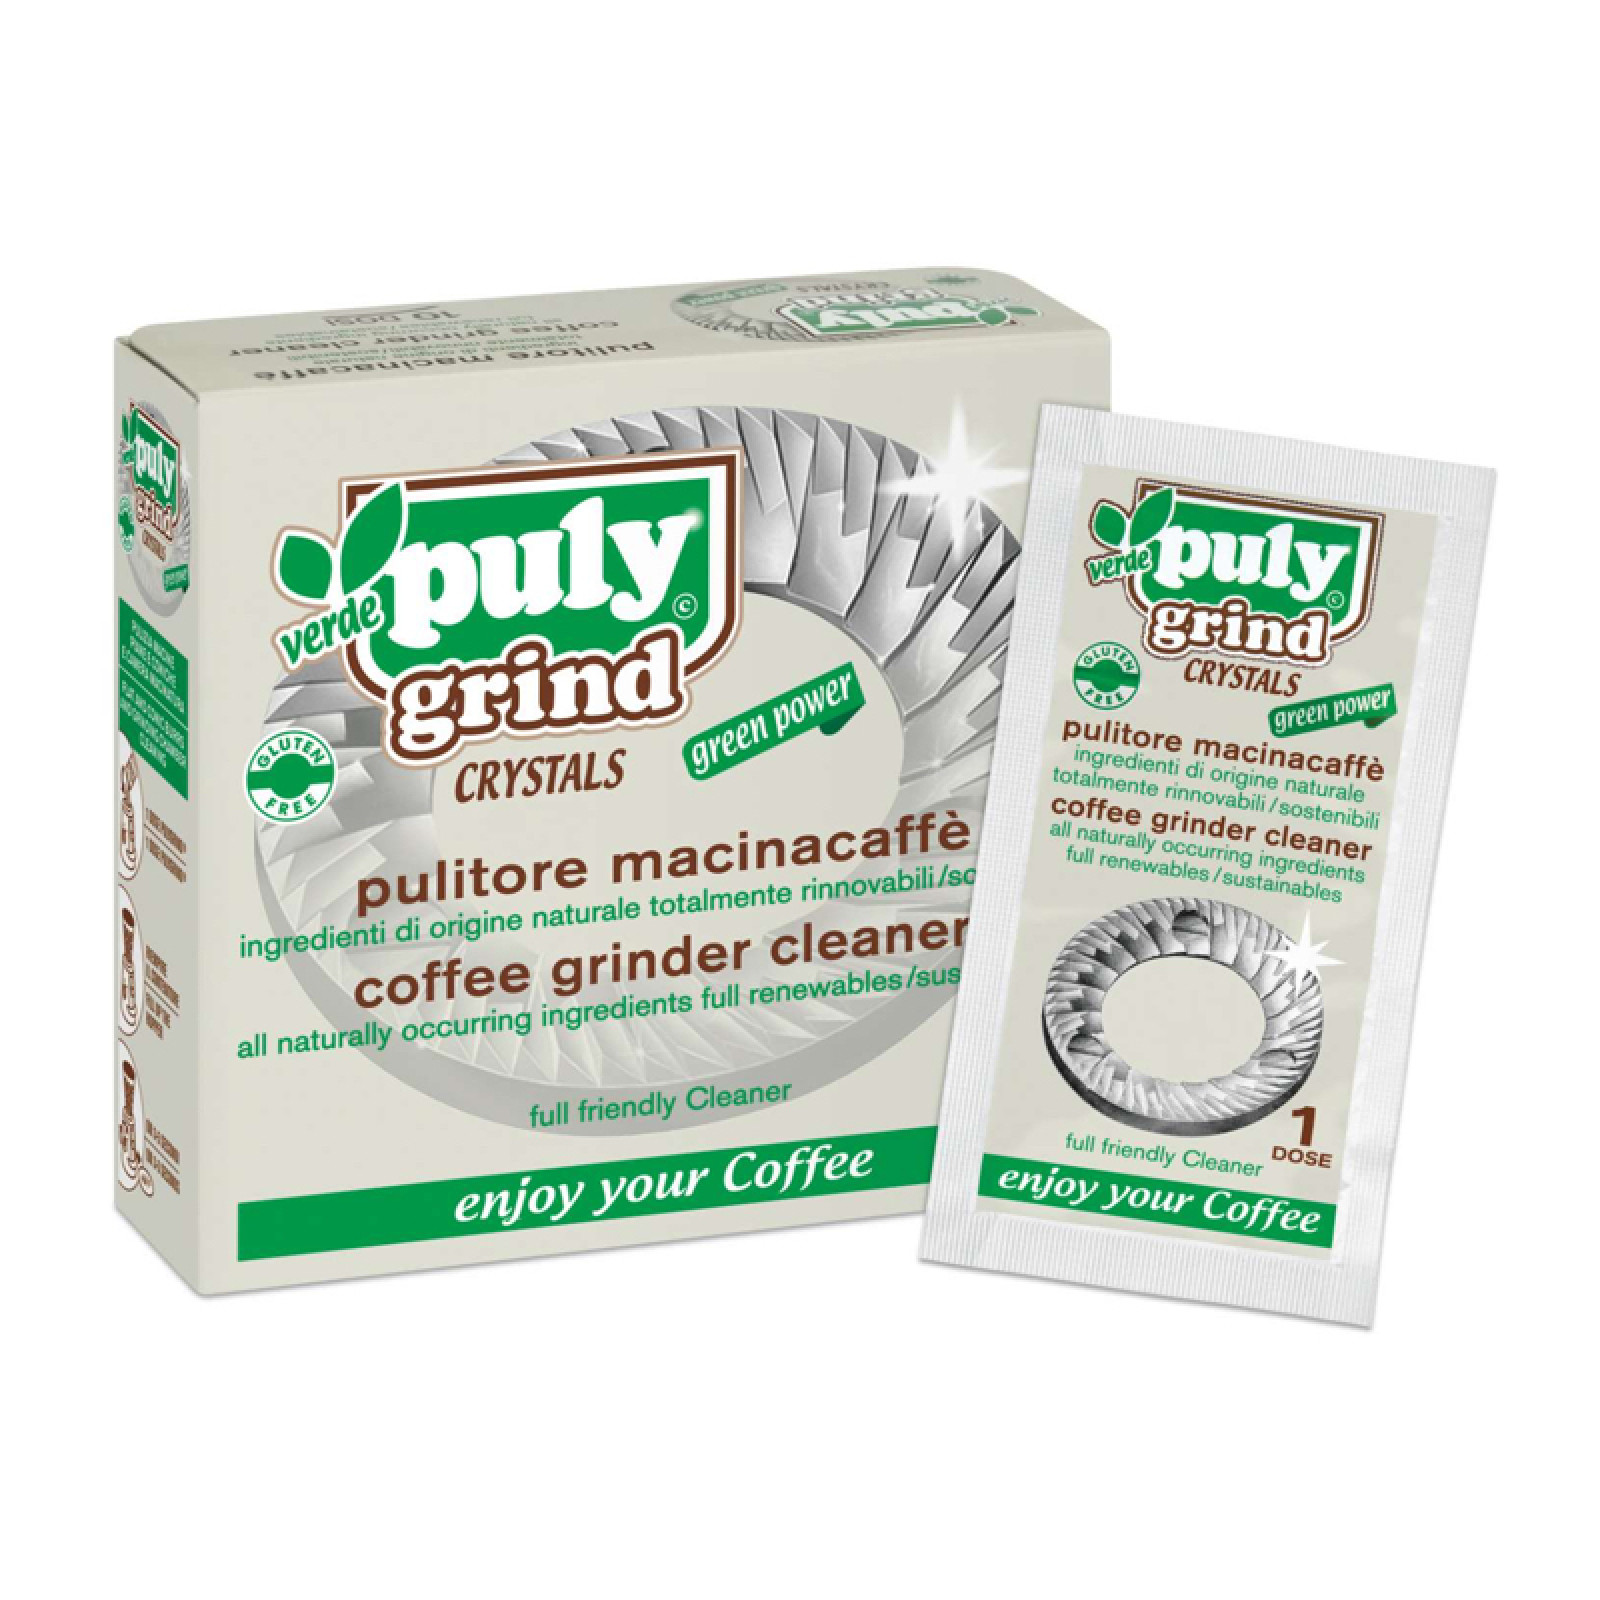 "Puly Grind Crystals Green Power" Coffee Grinder Cleaner, 10x15 g